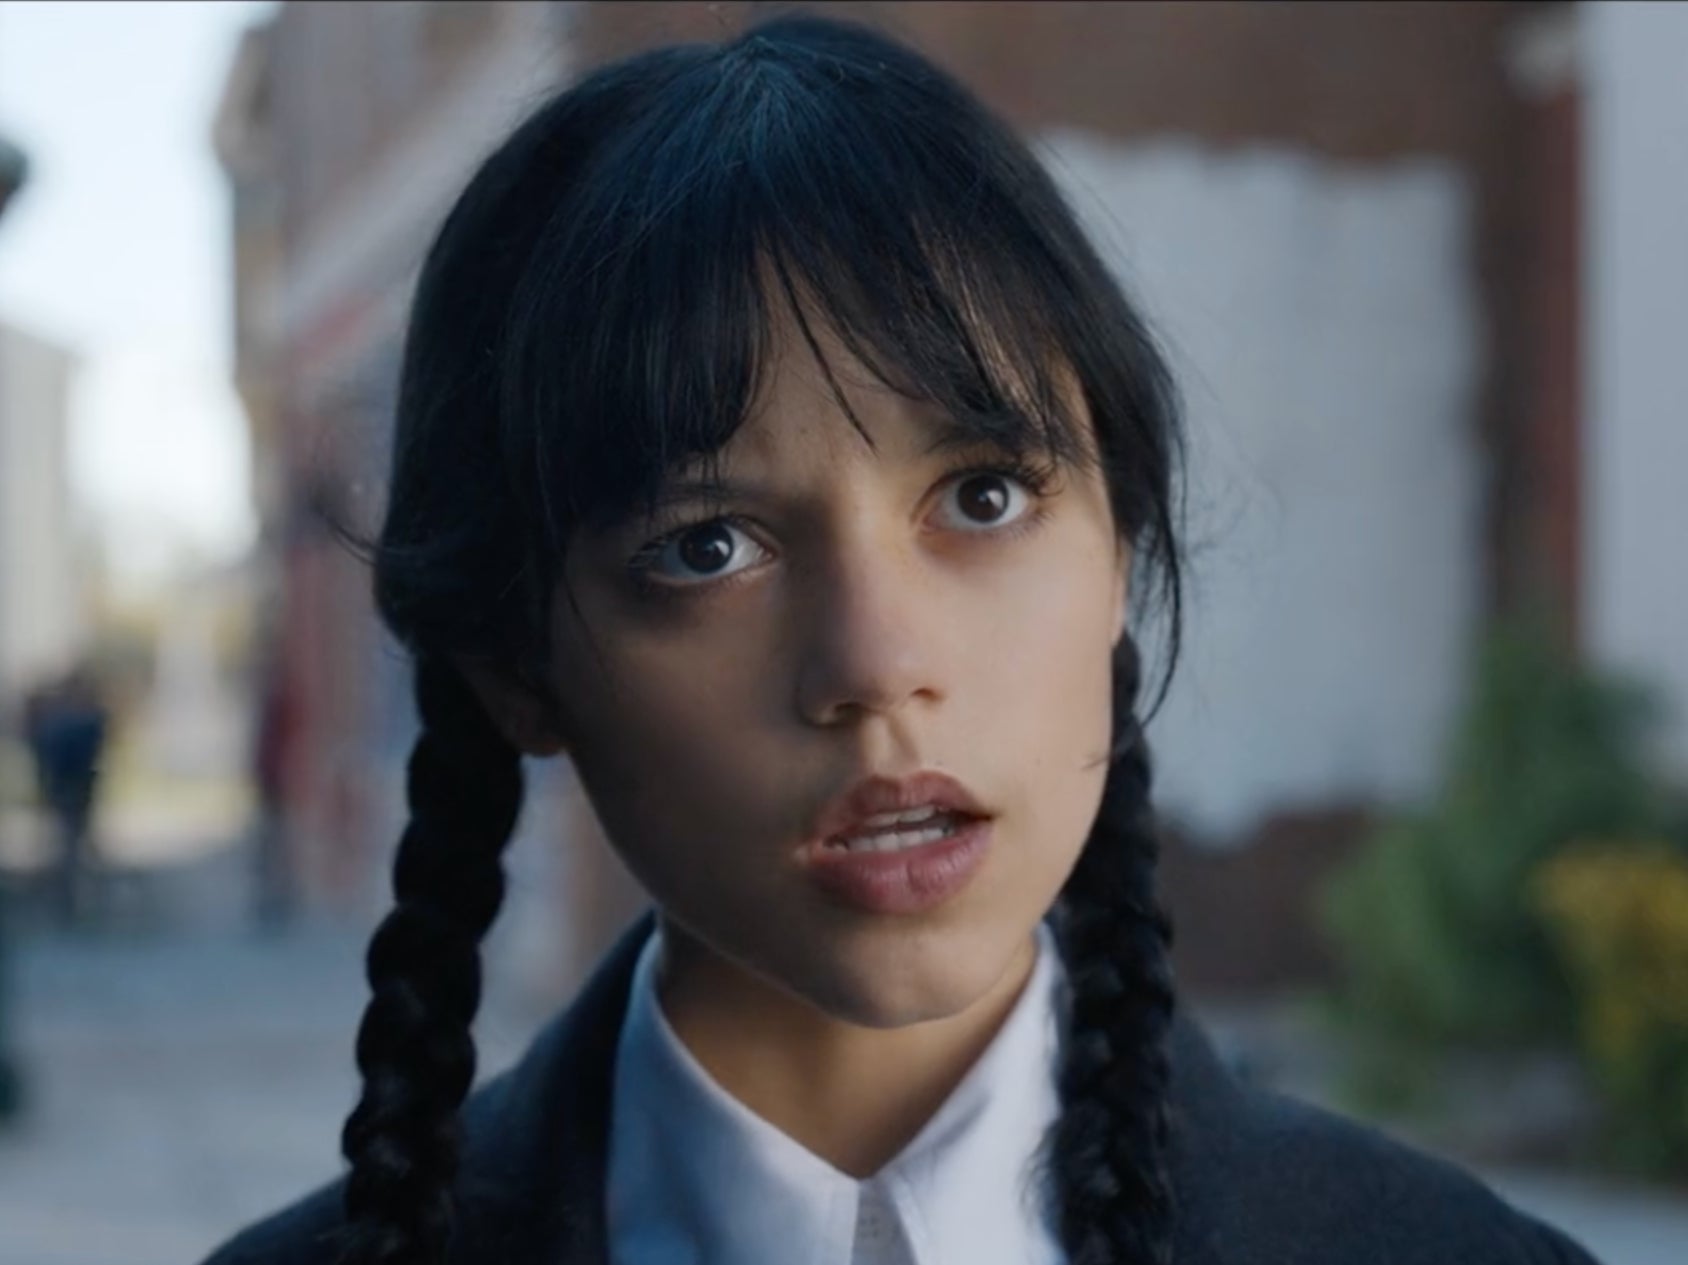 Jenna Ortega said her extensive edits to the script of ‘Wednesday’ were ‘almost unprofessional’